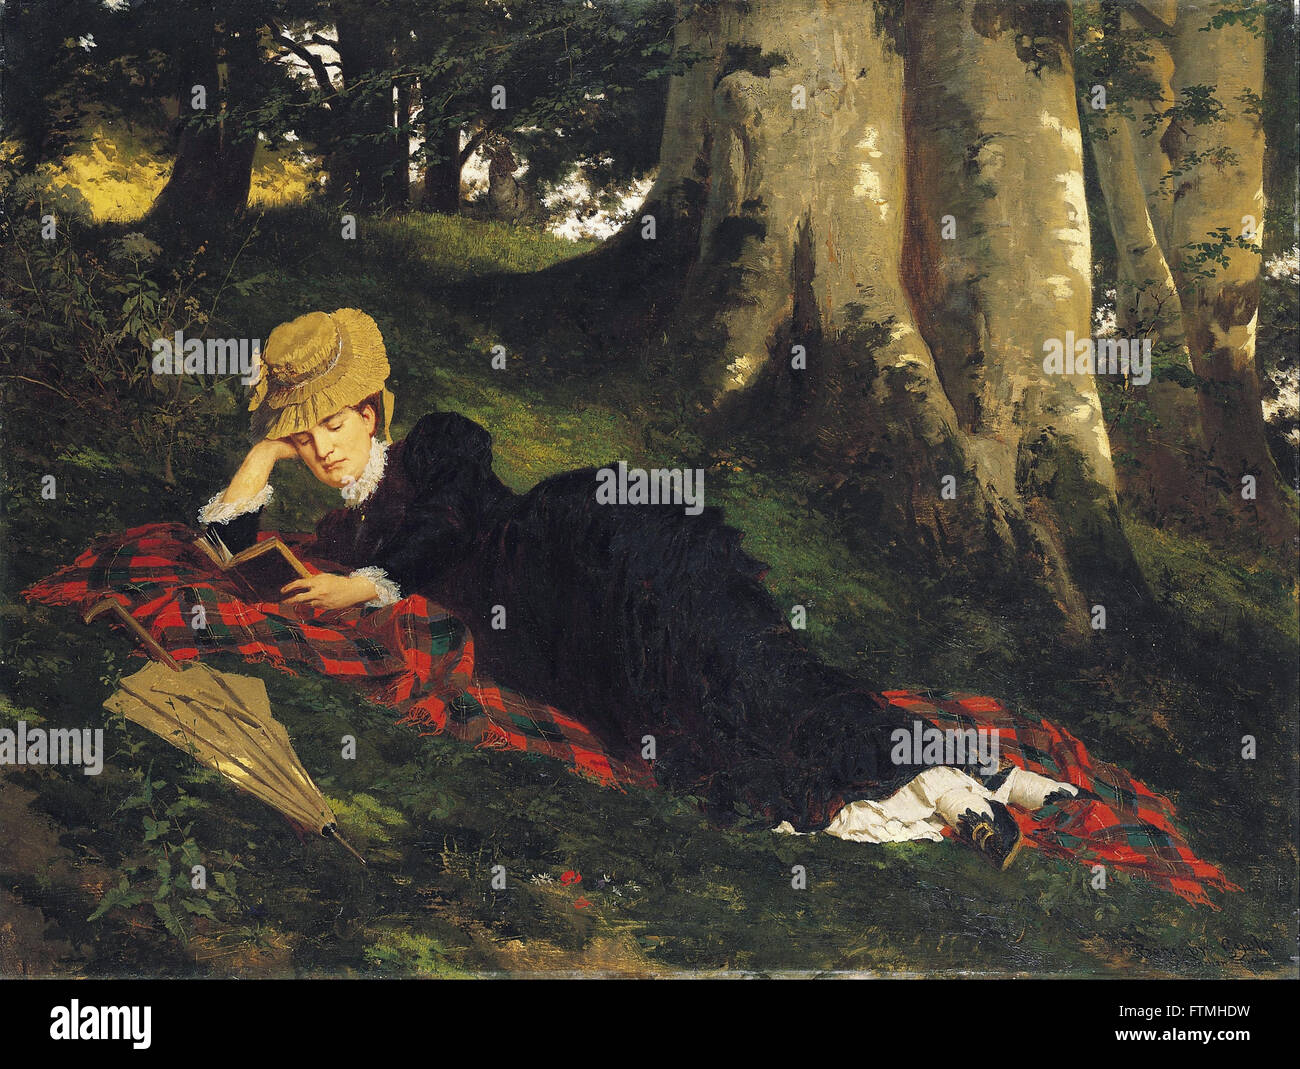 Benczúr, Gyula - Woman Reading in a Forest - Hungarian National Gallery Stock Photo